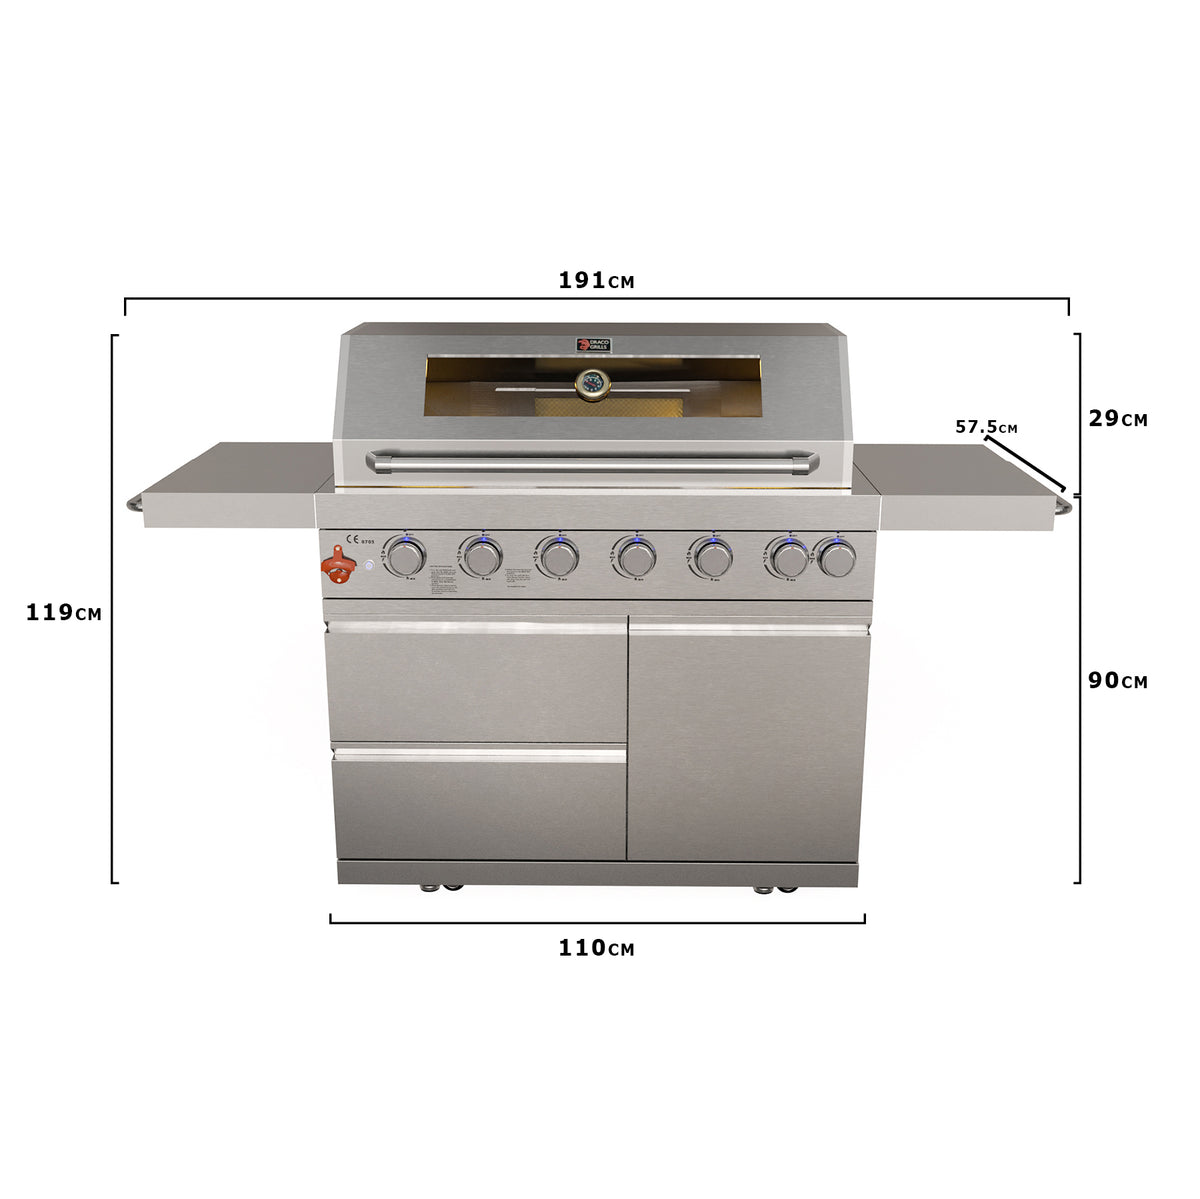 Draco Grills Z640 Deluxe 6 Burner Stainless Steel Gas Barbecue with Cabinet